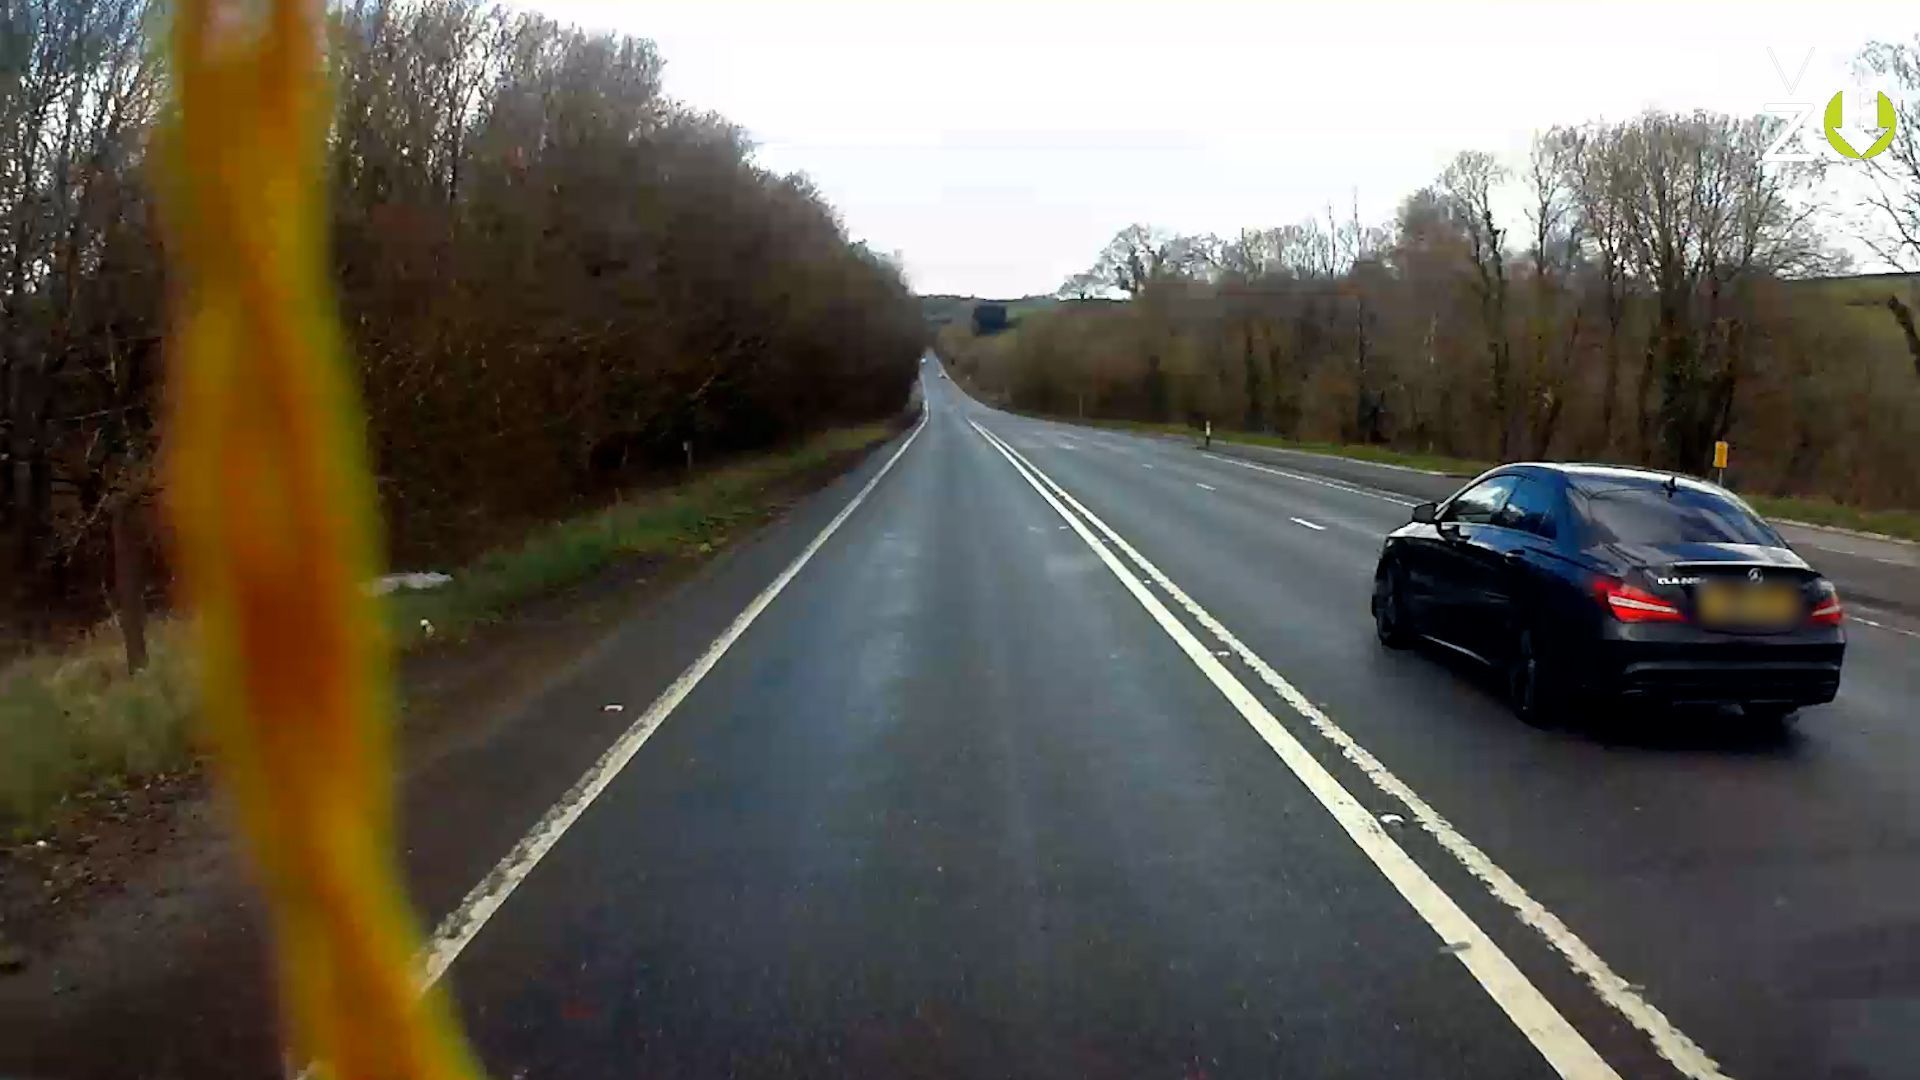 A vehicle overtaking over solid double lines